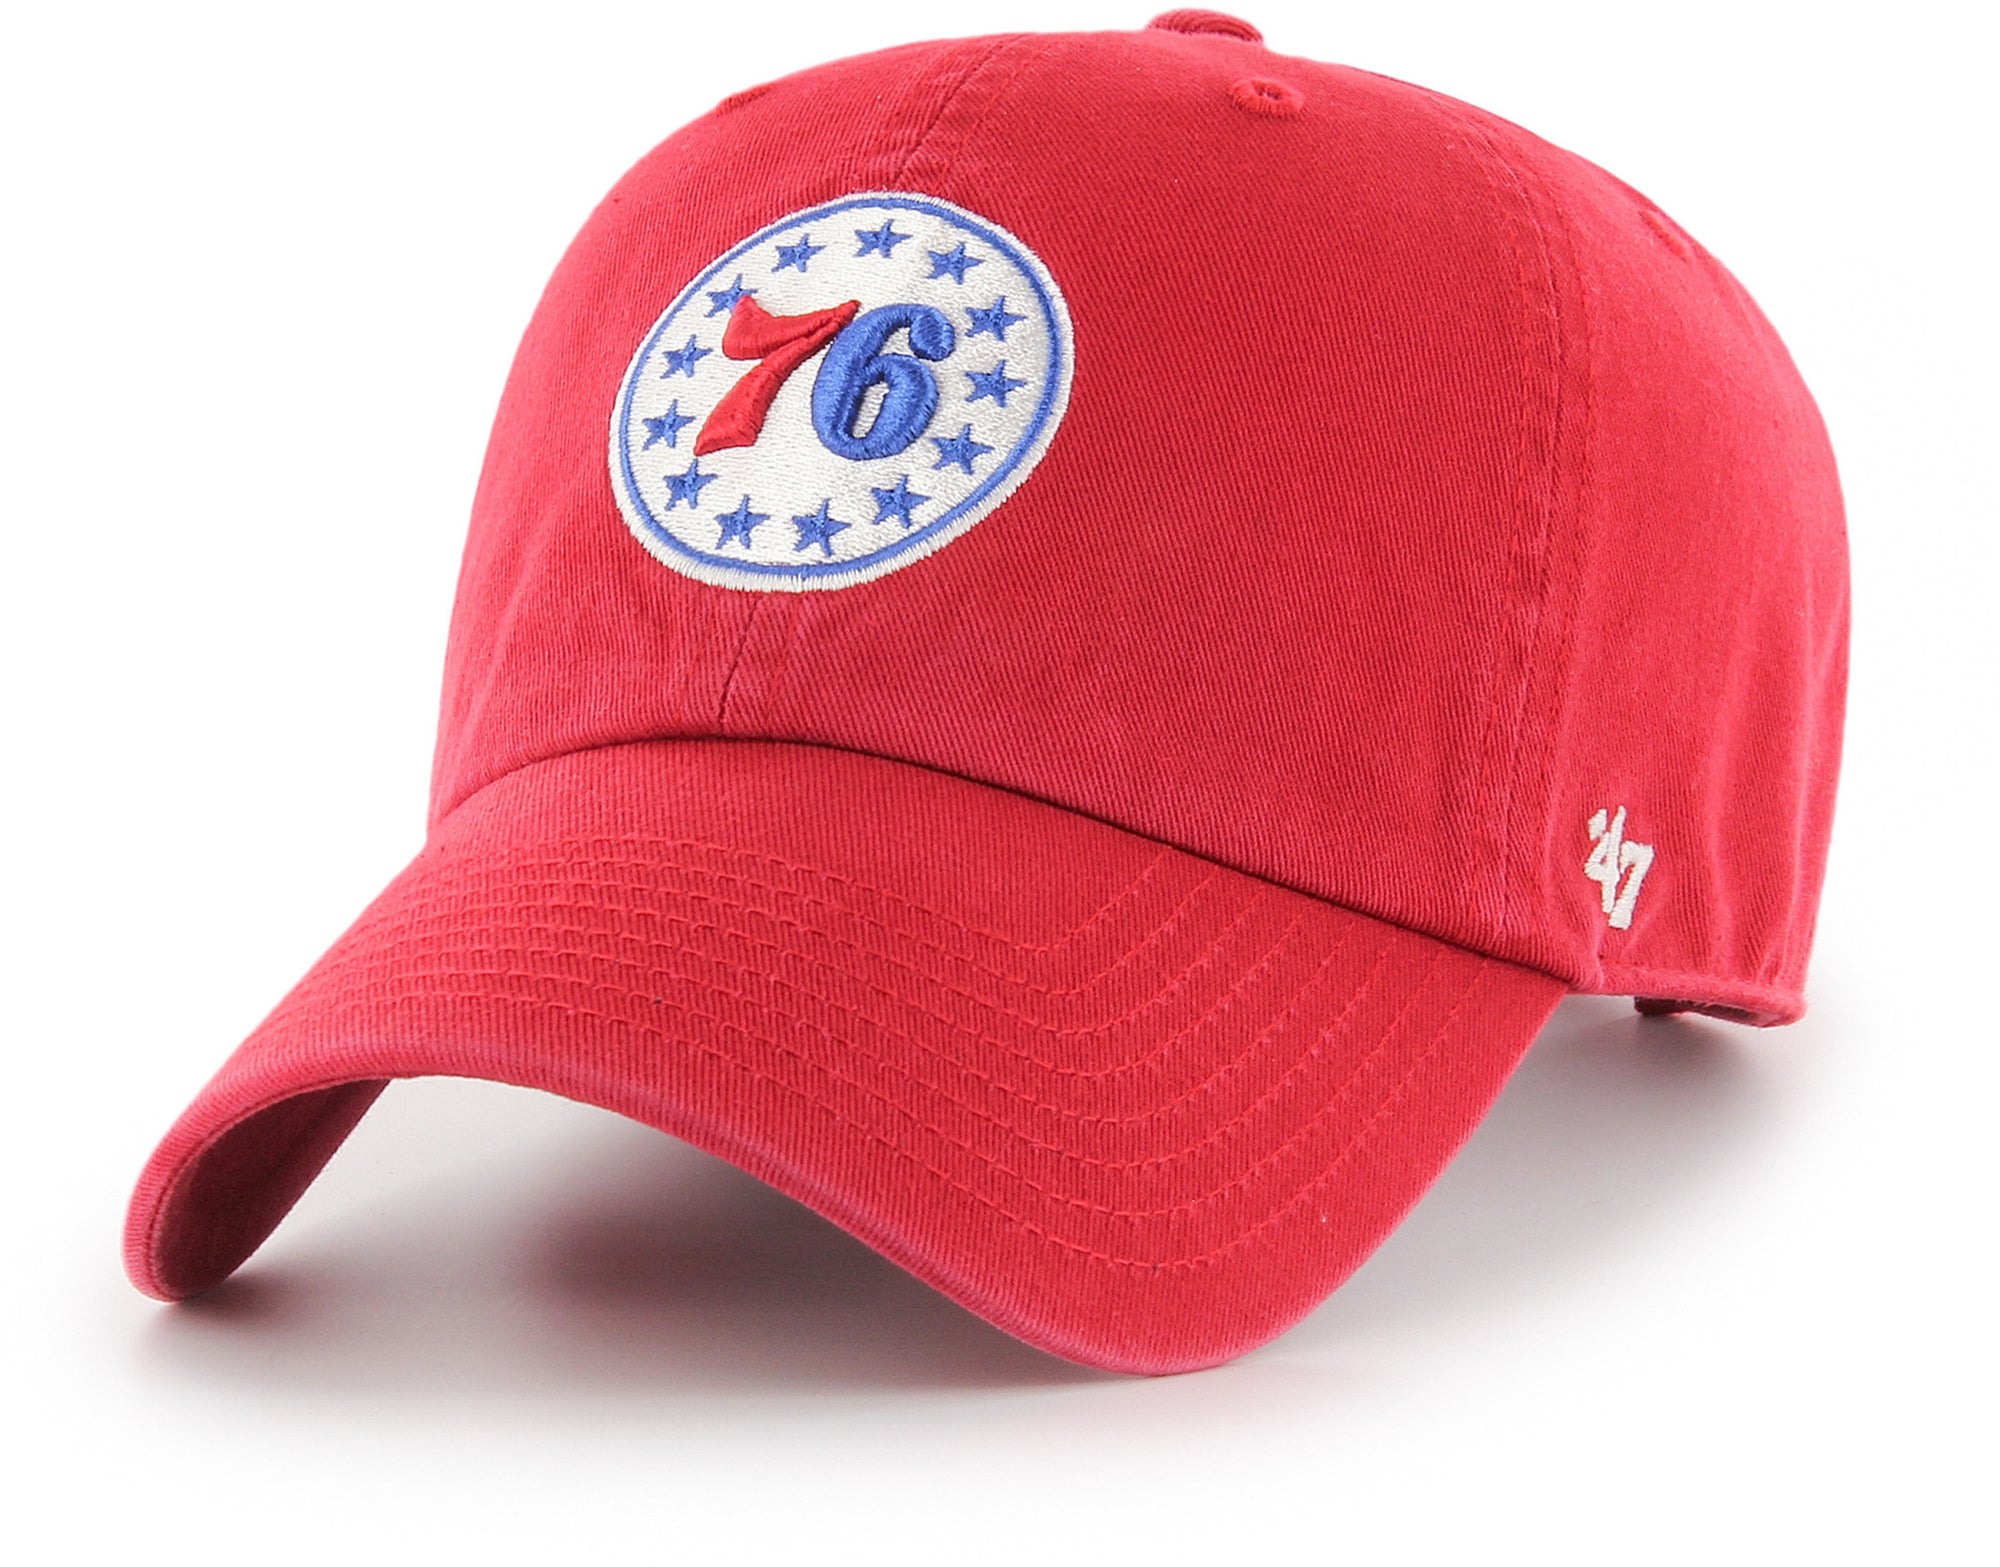 Philadelphia 76ers throwback apparel and hats